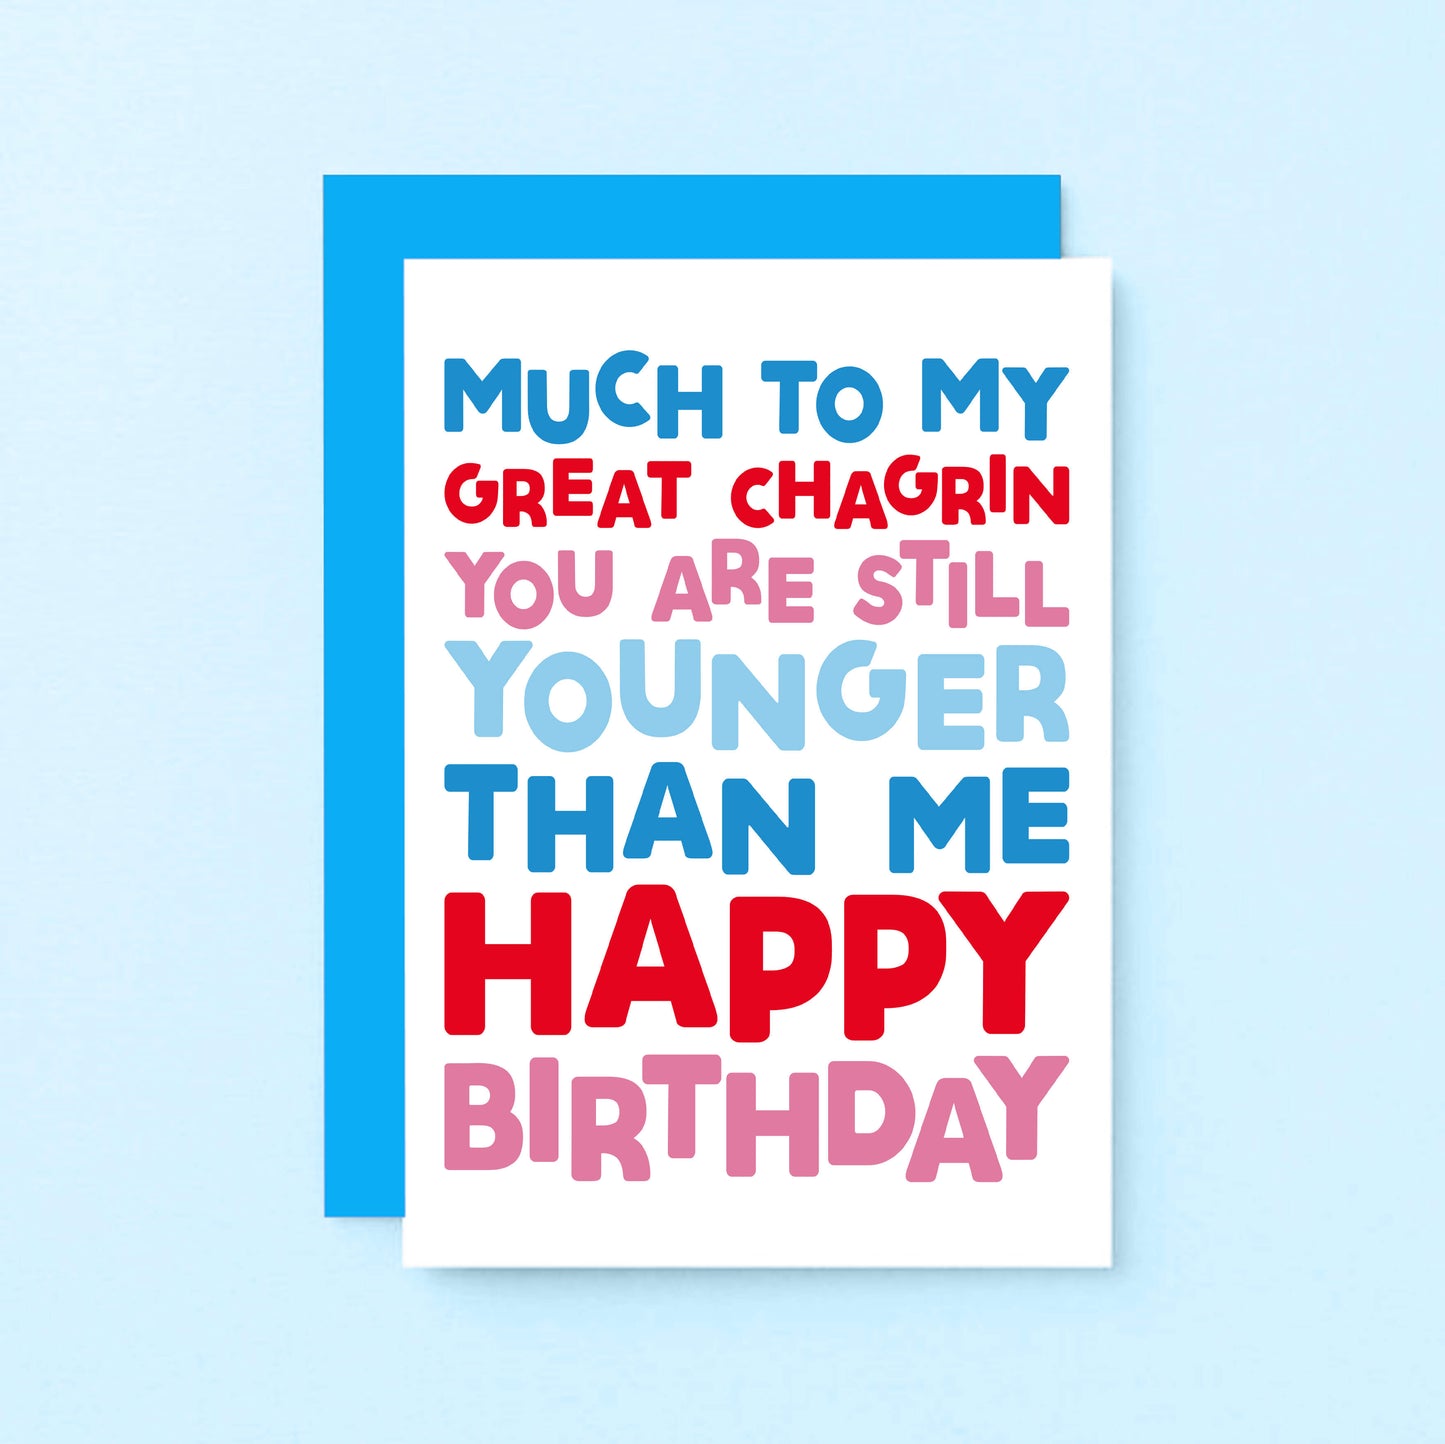 Birthday Card by SixElevenCreations. Reads Much to my great chagrin you are still younger than me. Happy birthday. Product Code SE0702A6